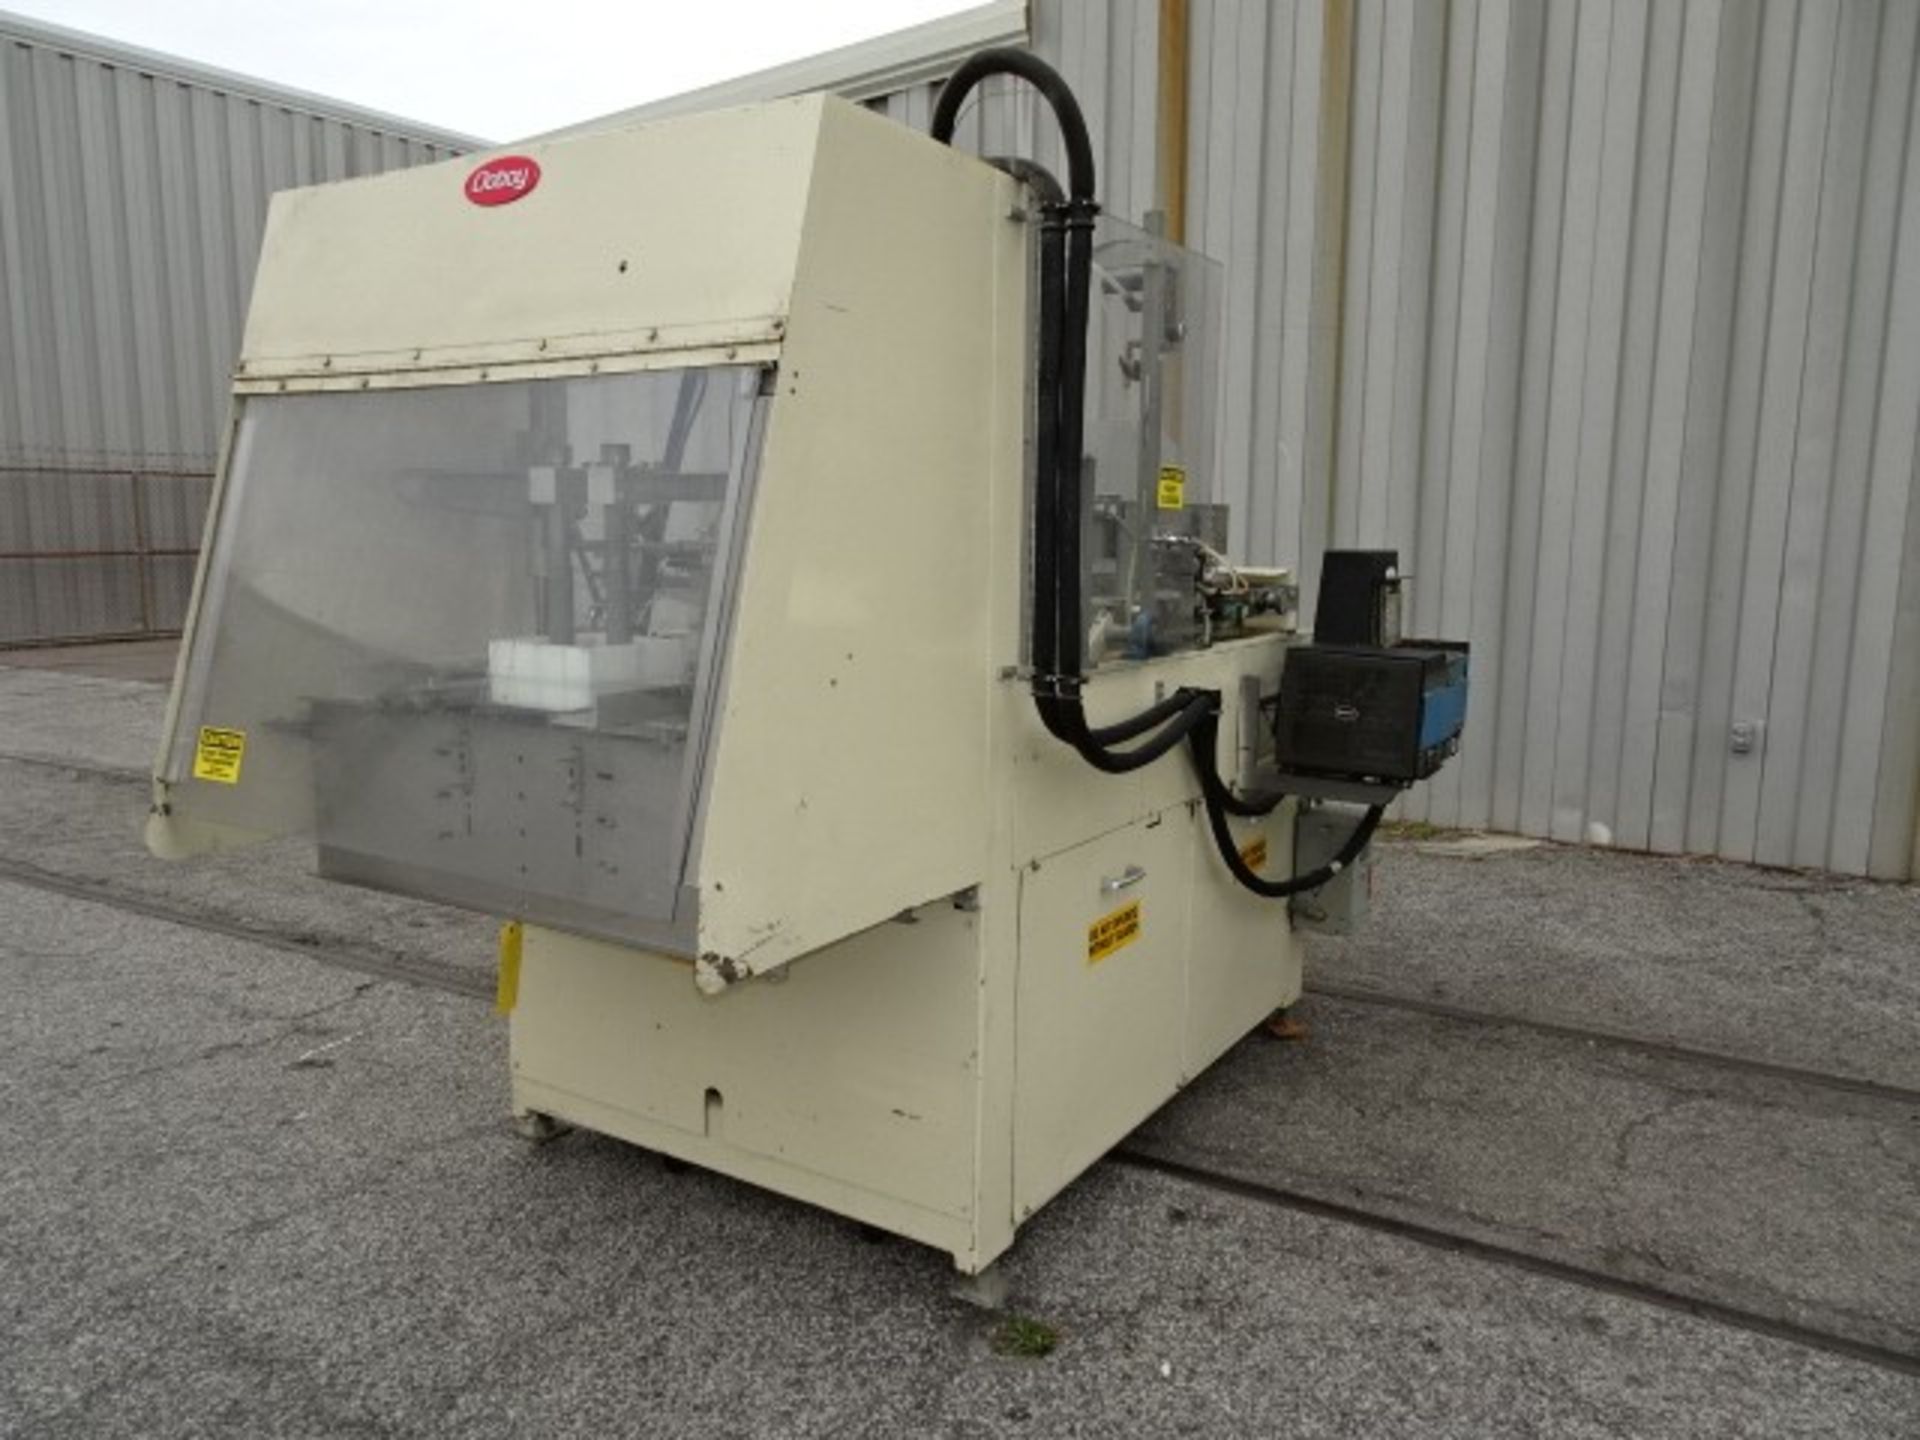 DOBOY 751 BII Tray Former with Nordson 3400 Hot Melt Glue (Located Charleston, SC) (385) - Image 3 of 4